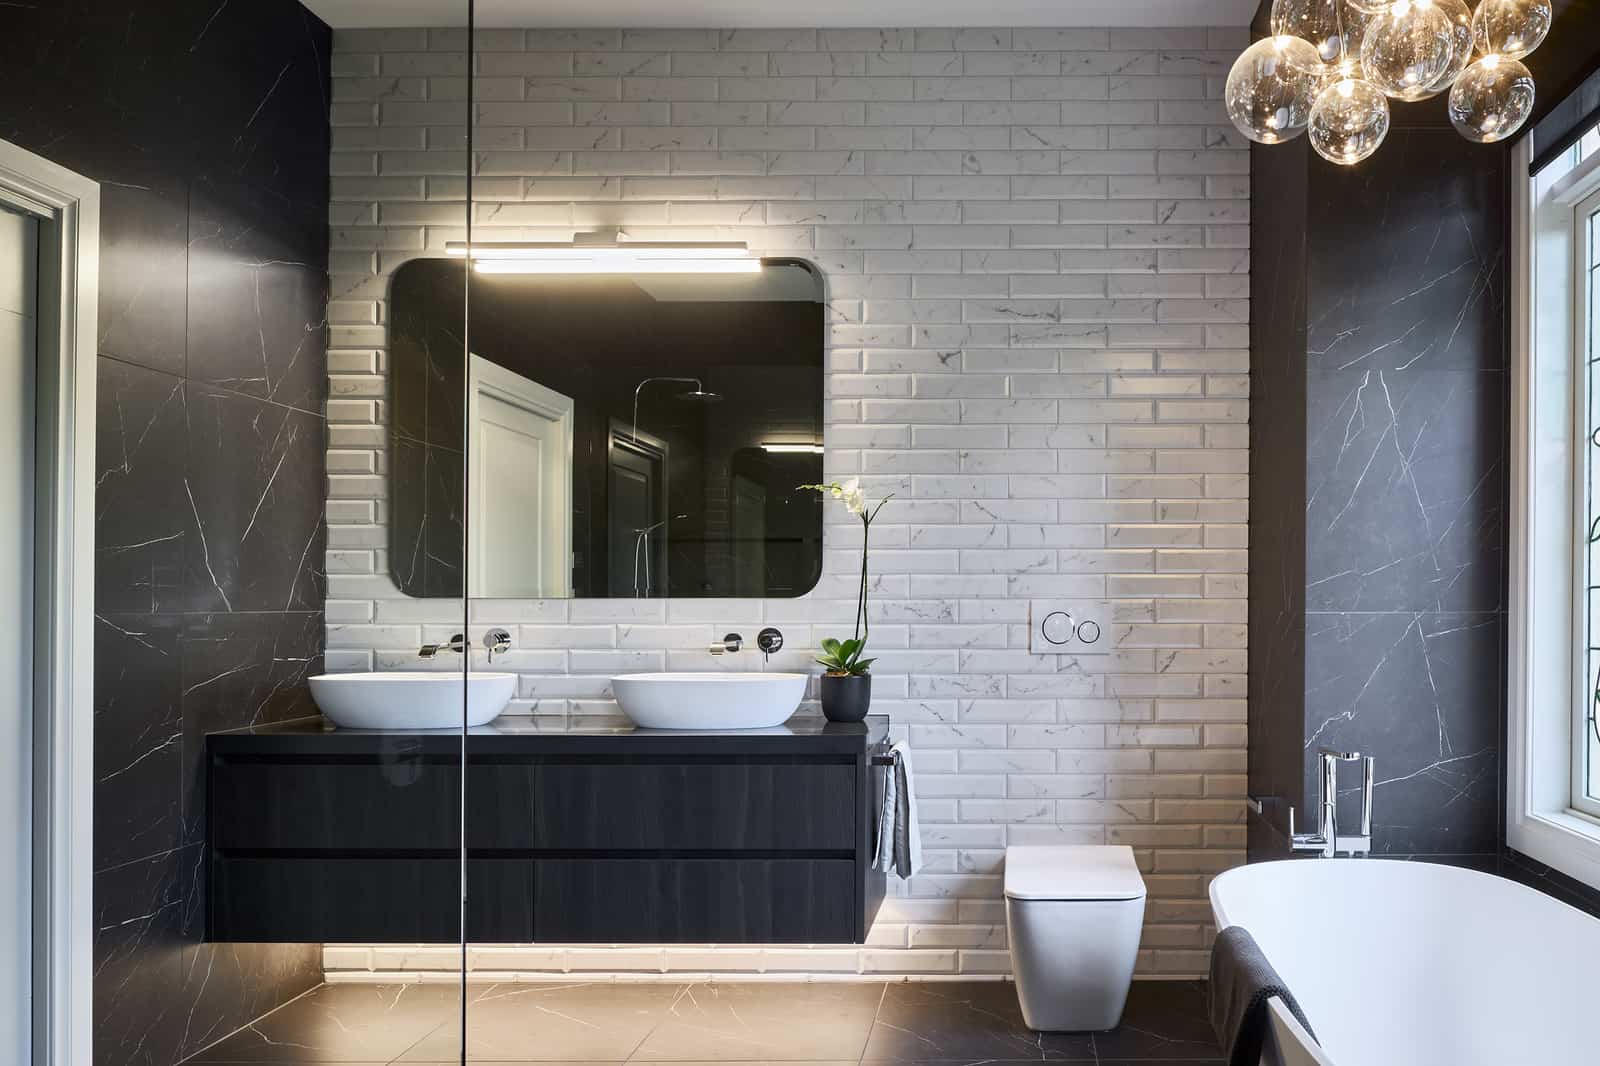 Bathroom Renovations Melbourne Award, How Much Does A Bathroom Renovation Cost In Melbourne